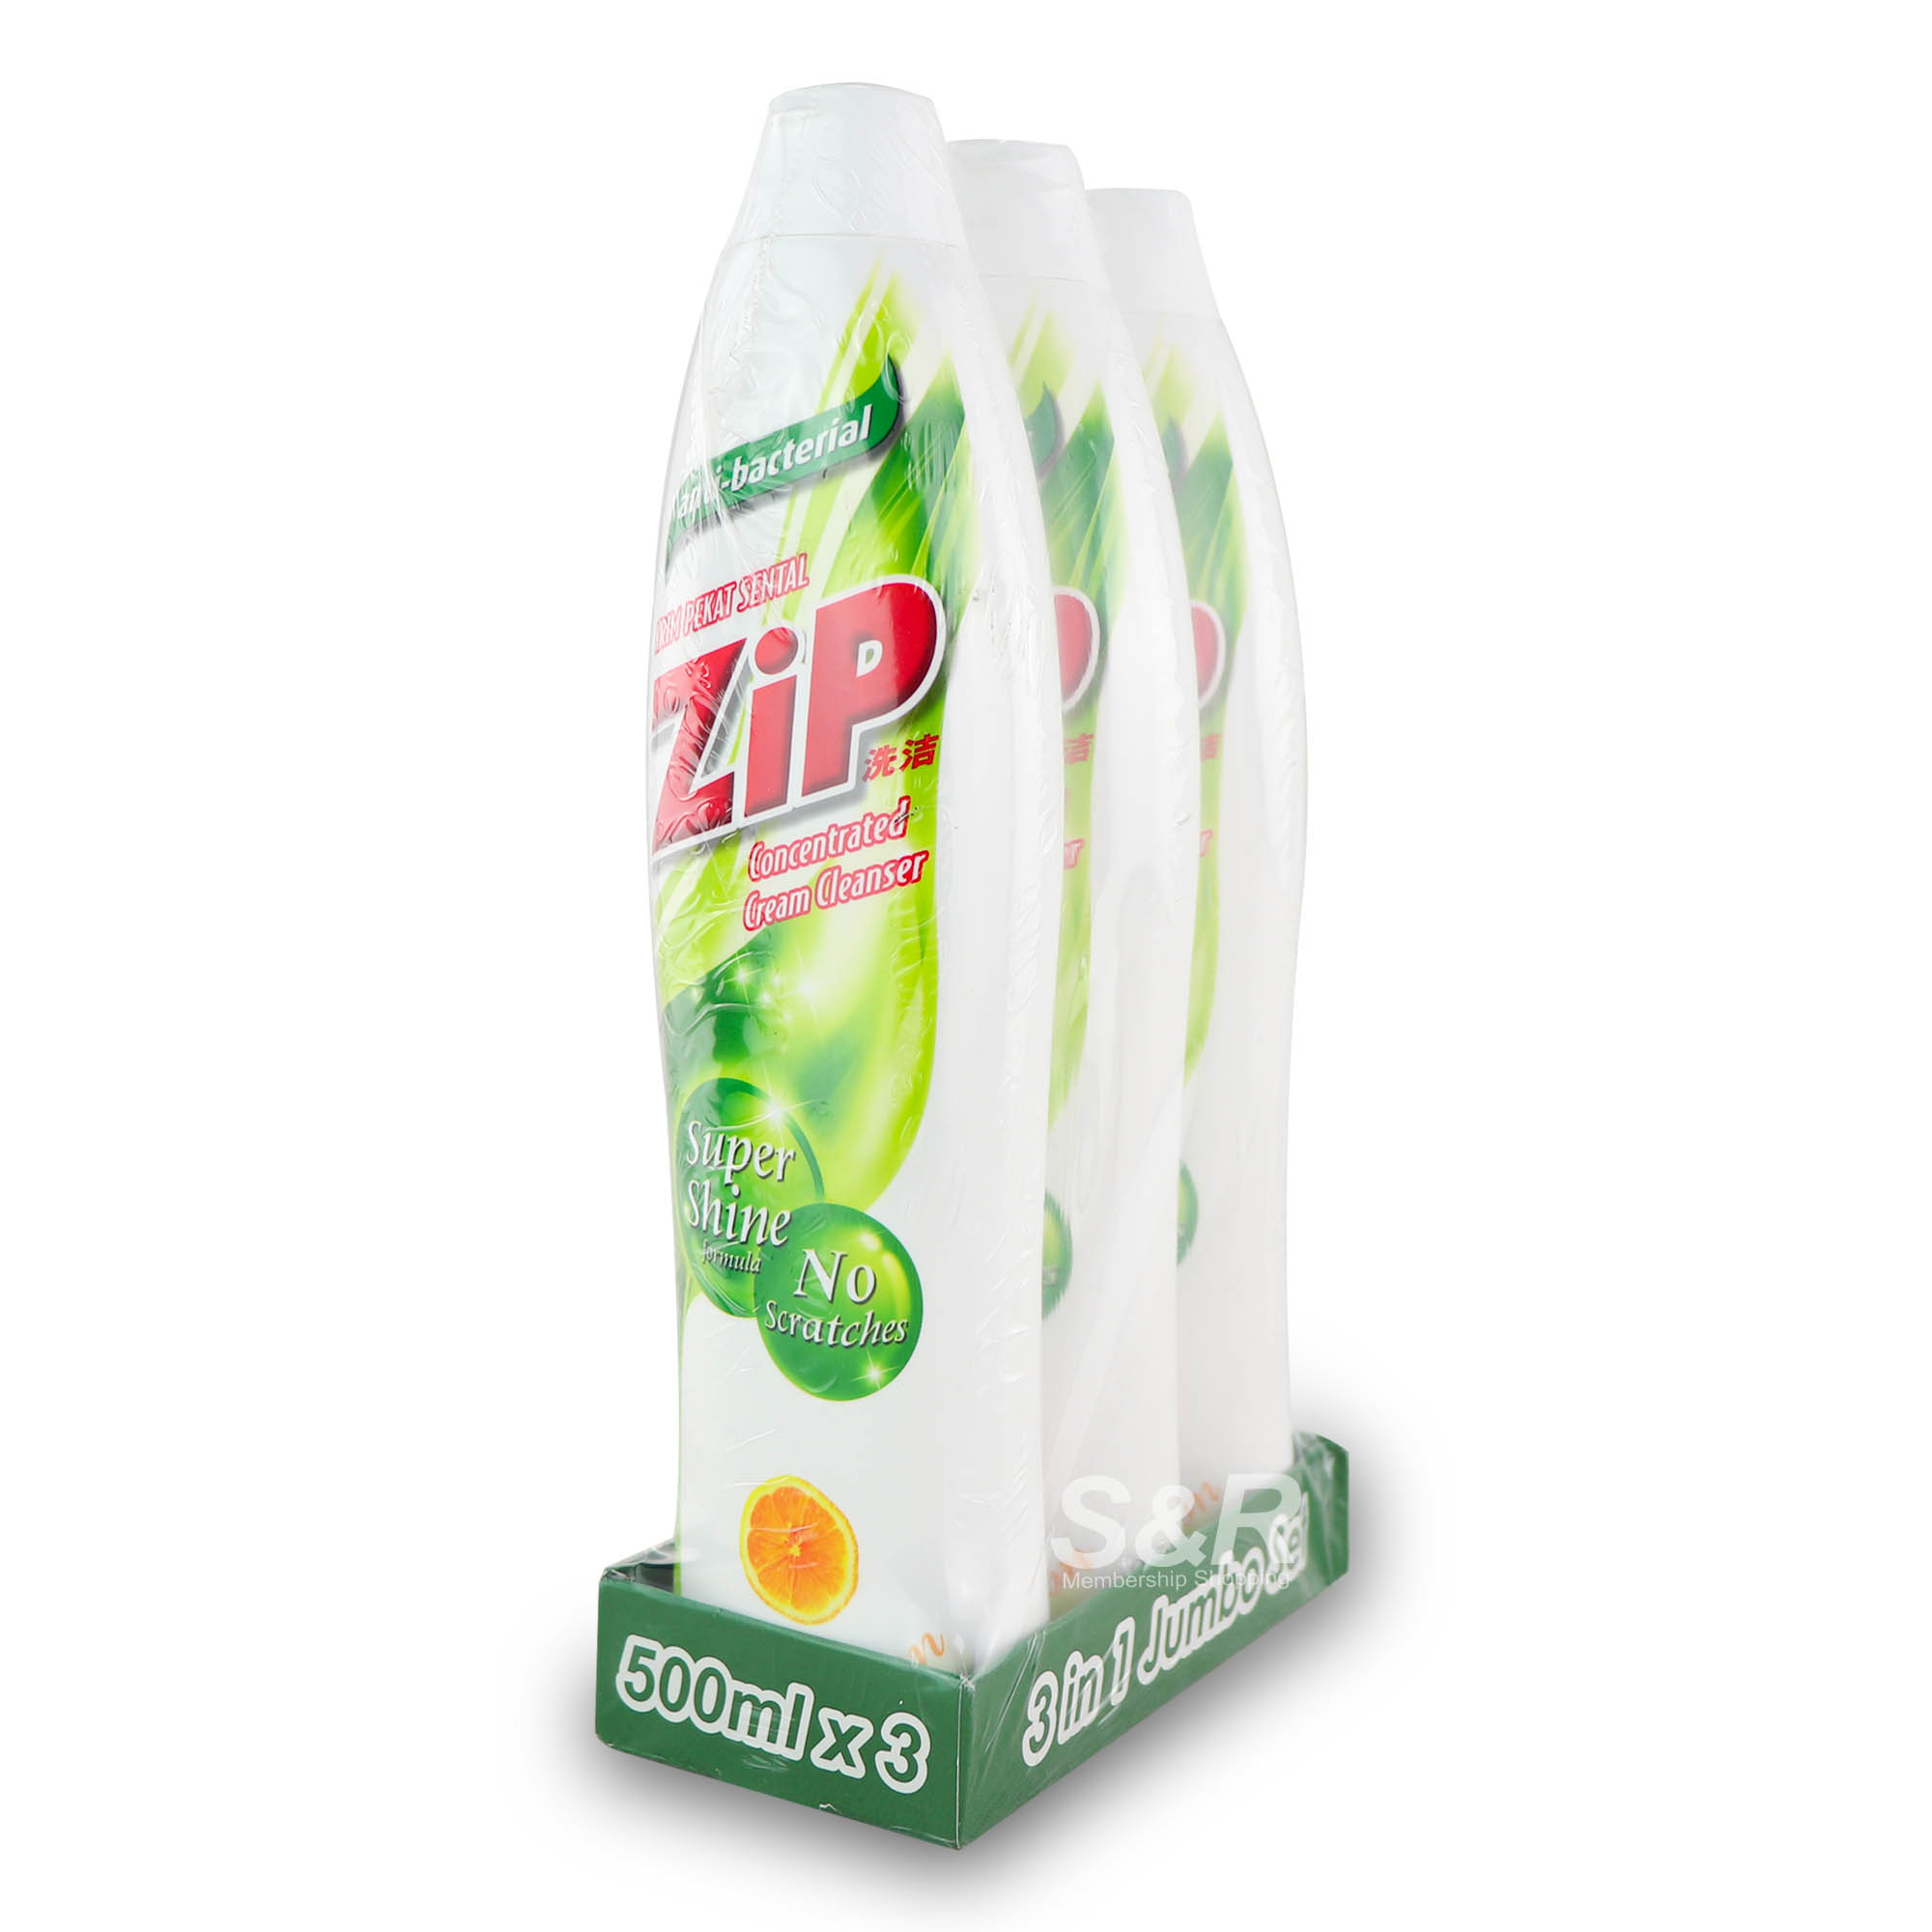 Zip Concentrated Cream Cleanser 3pcs x 500mL